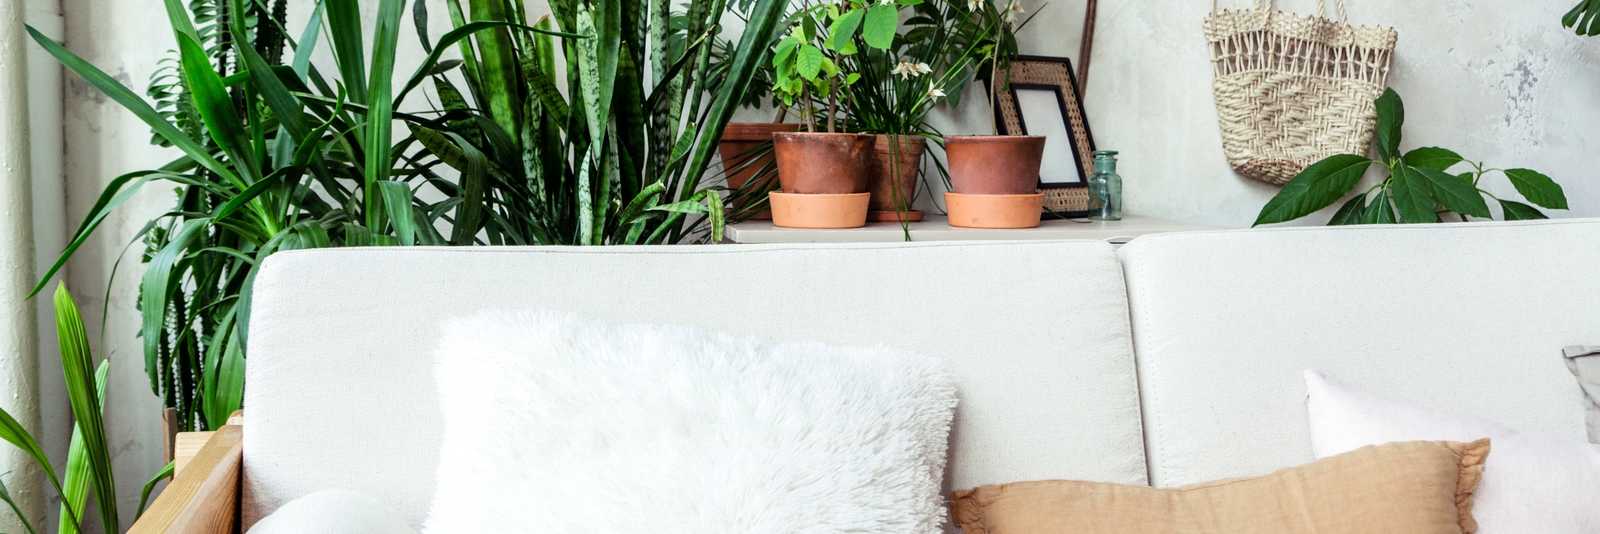 White sofa against a rustic grey wall, with various plant pots and house plants